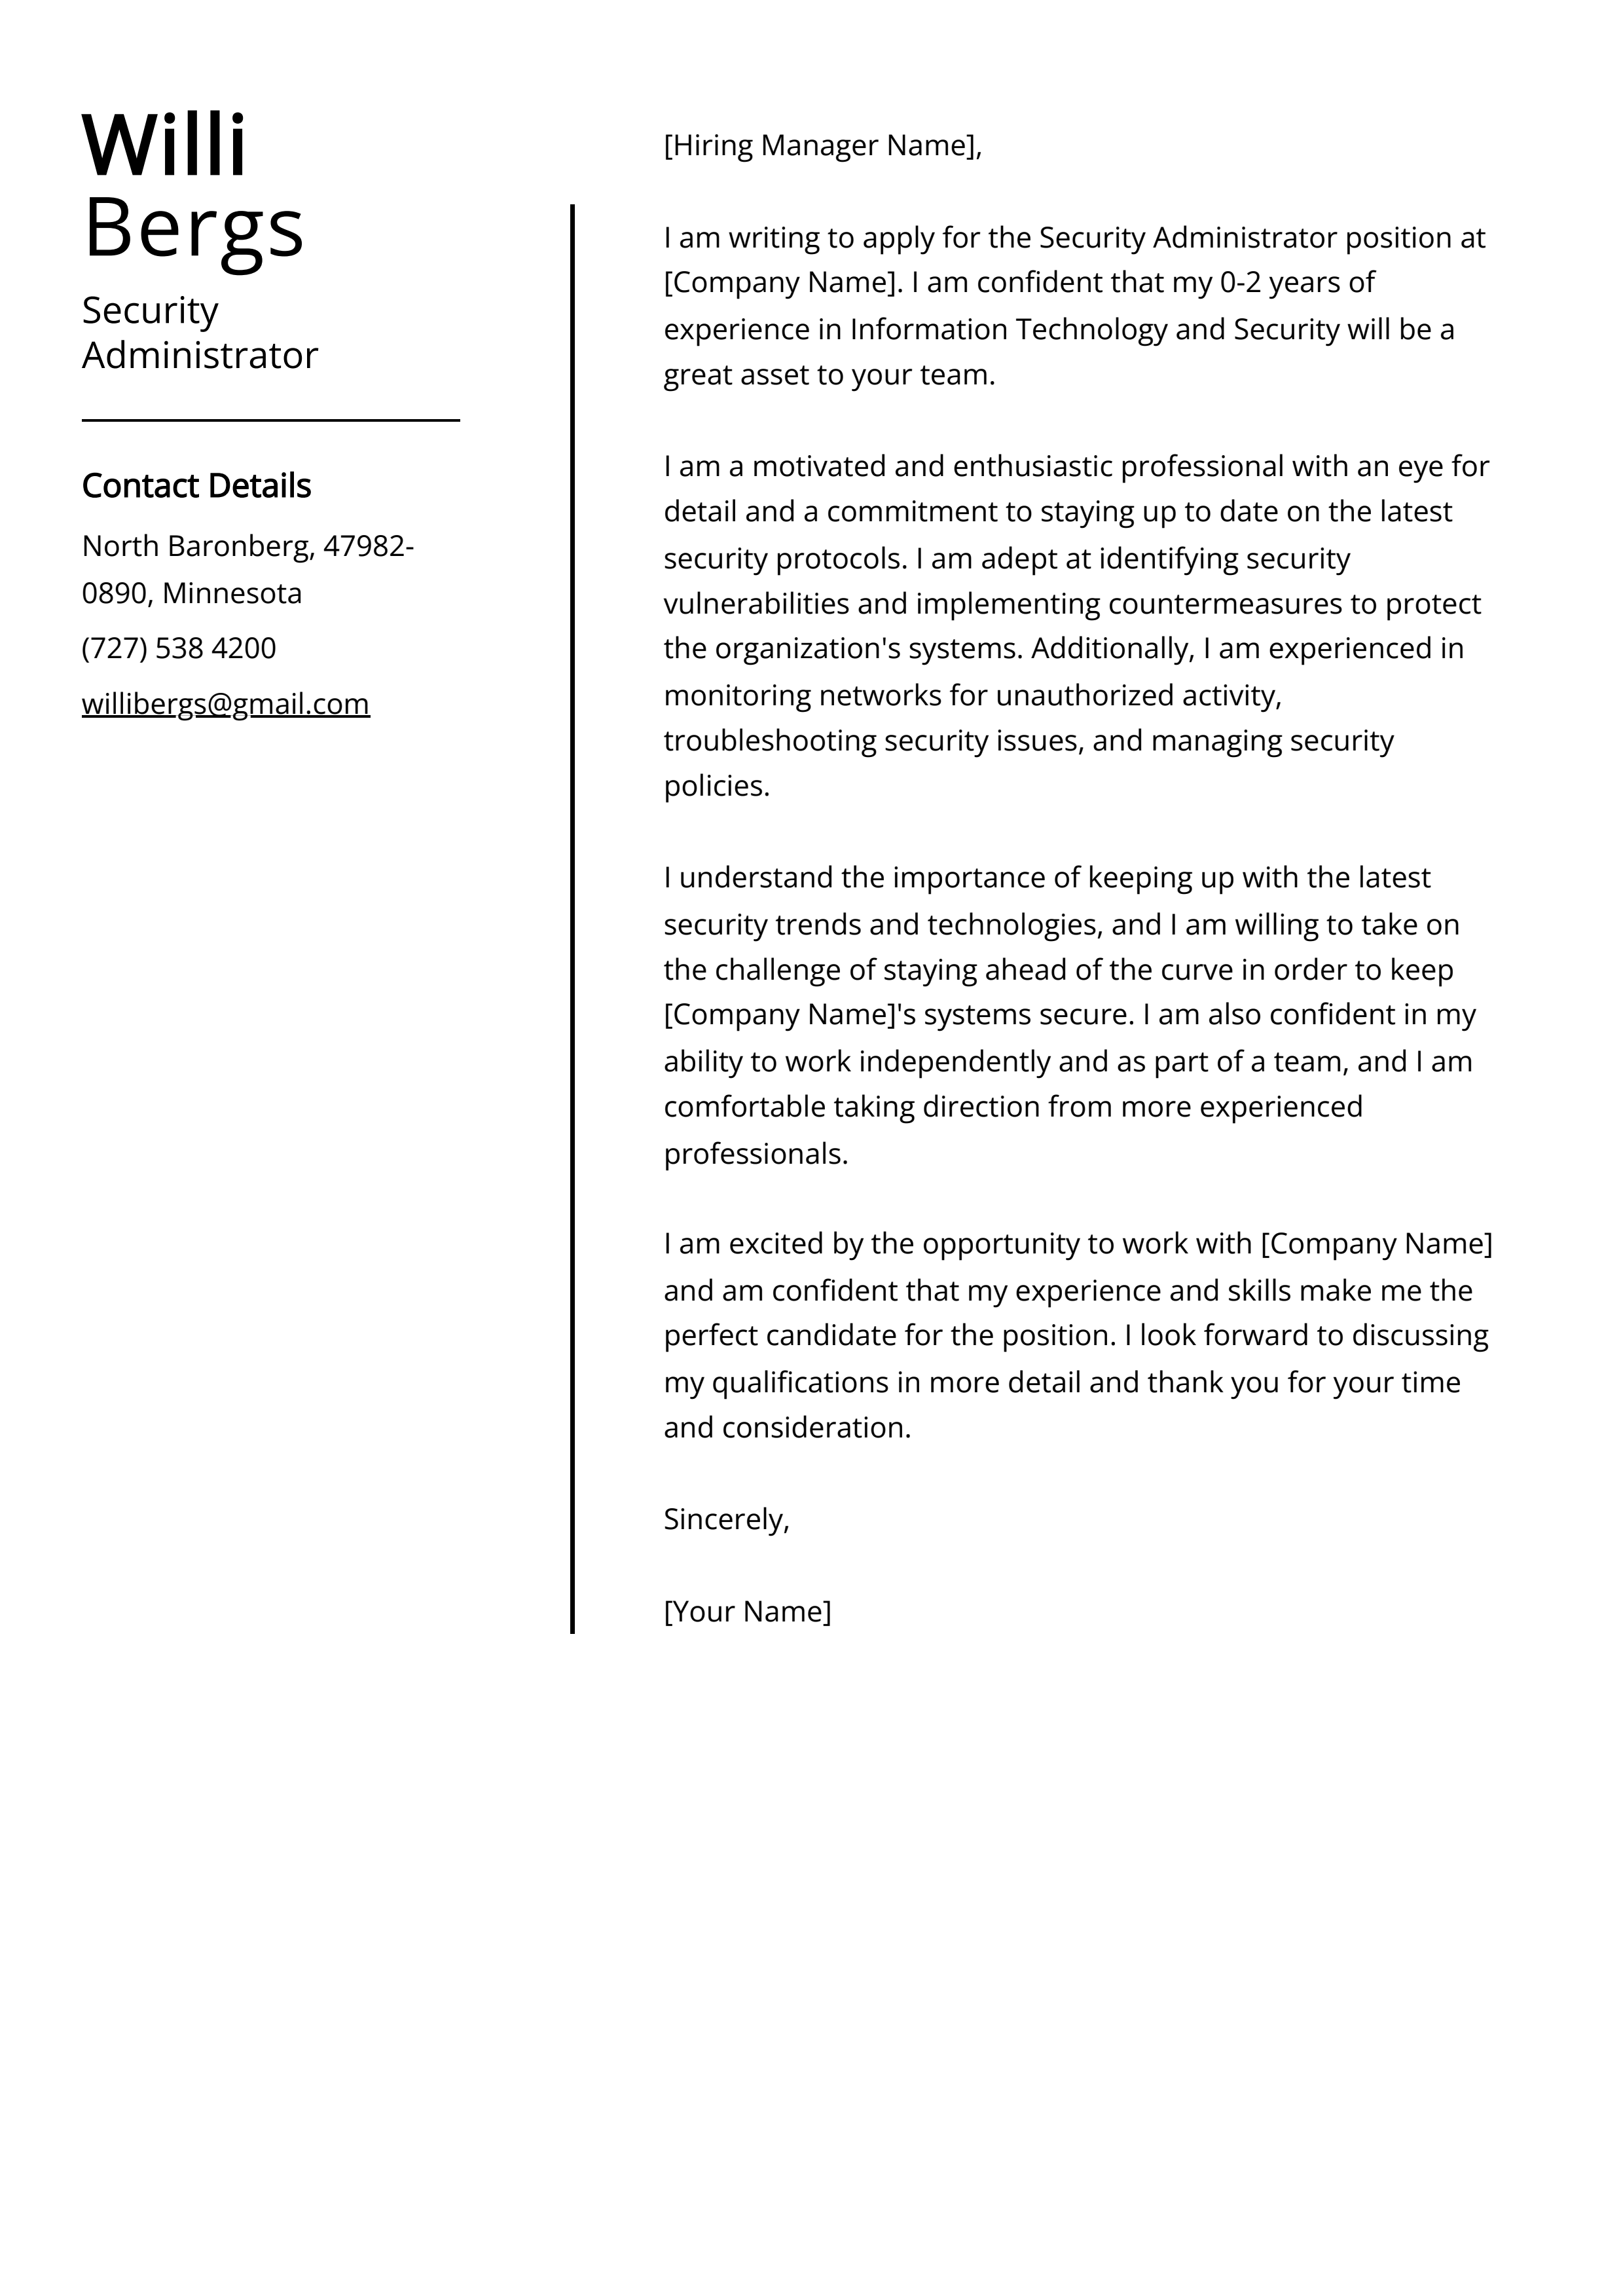 Security Administrator Cover Letter Example